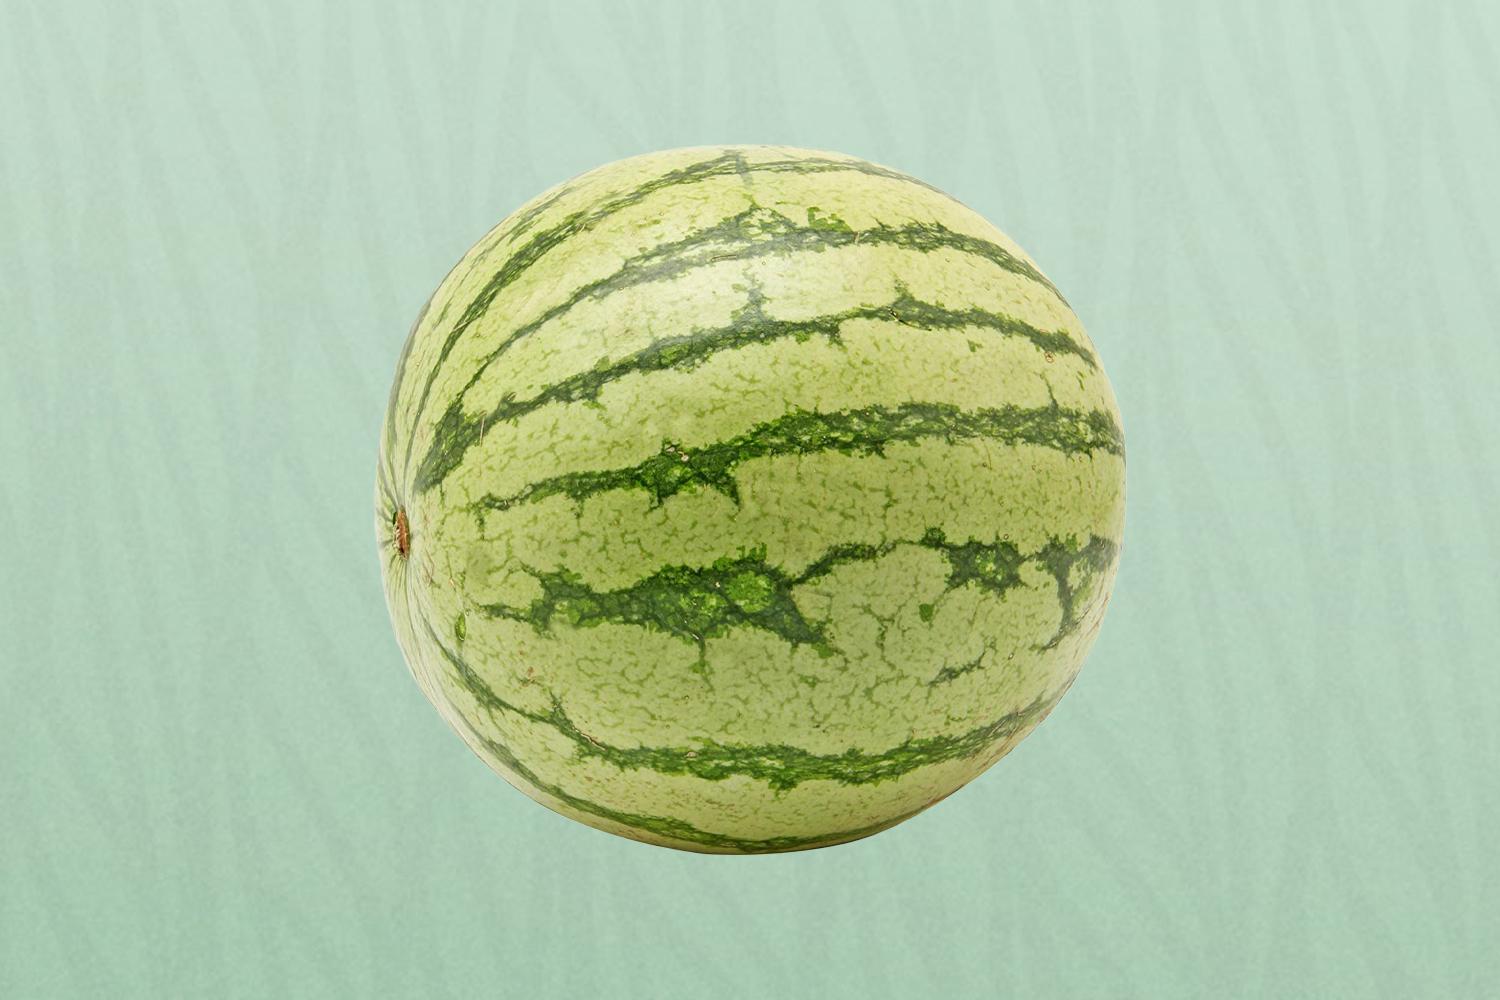 Watermelon is one of the best healthy snacks to eat when you